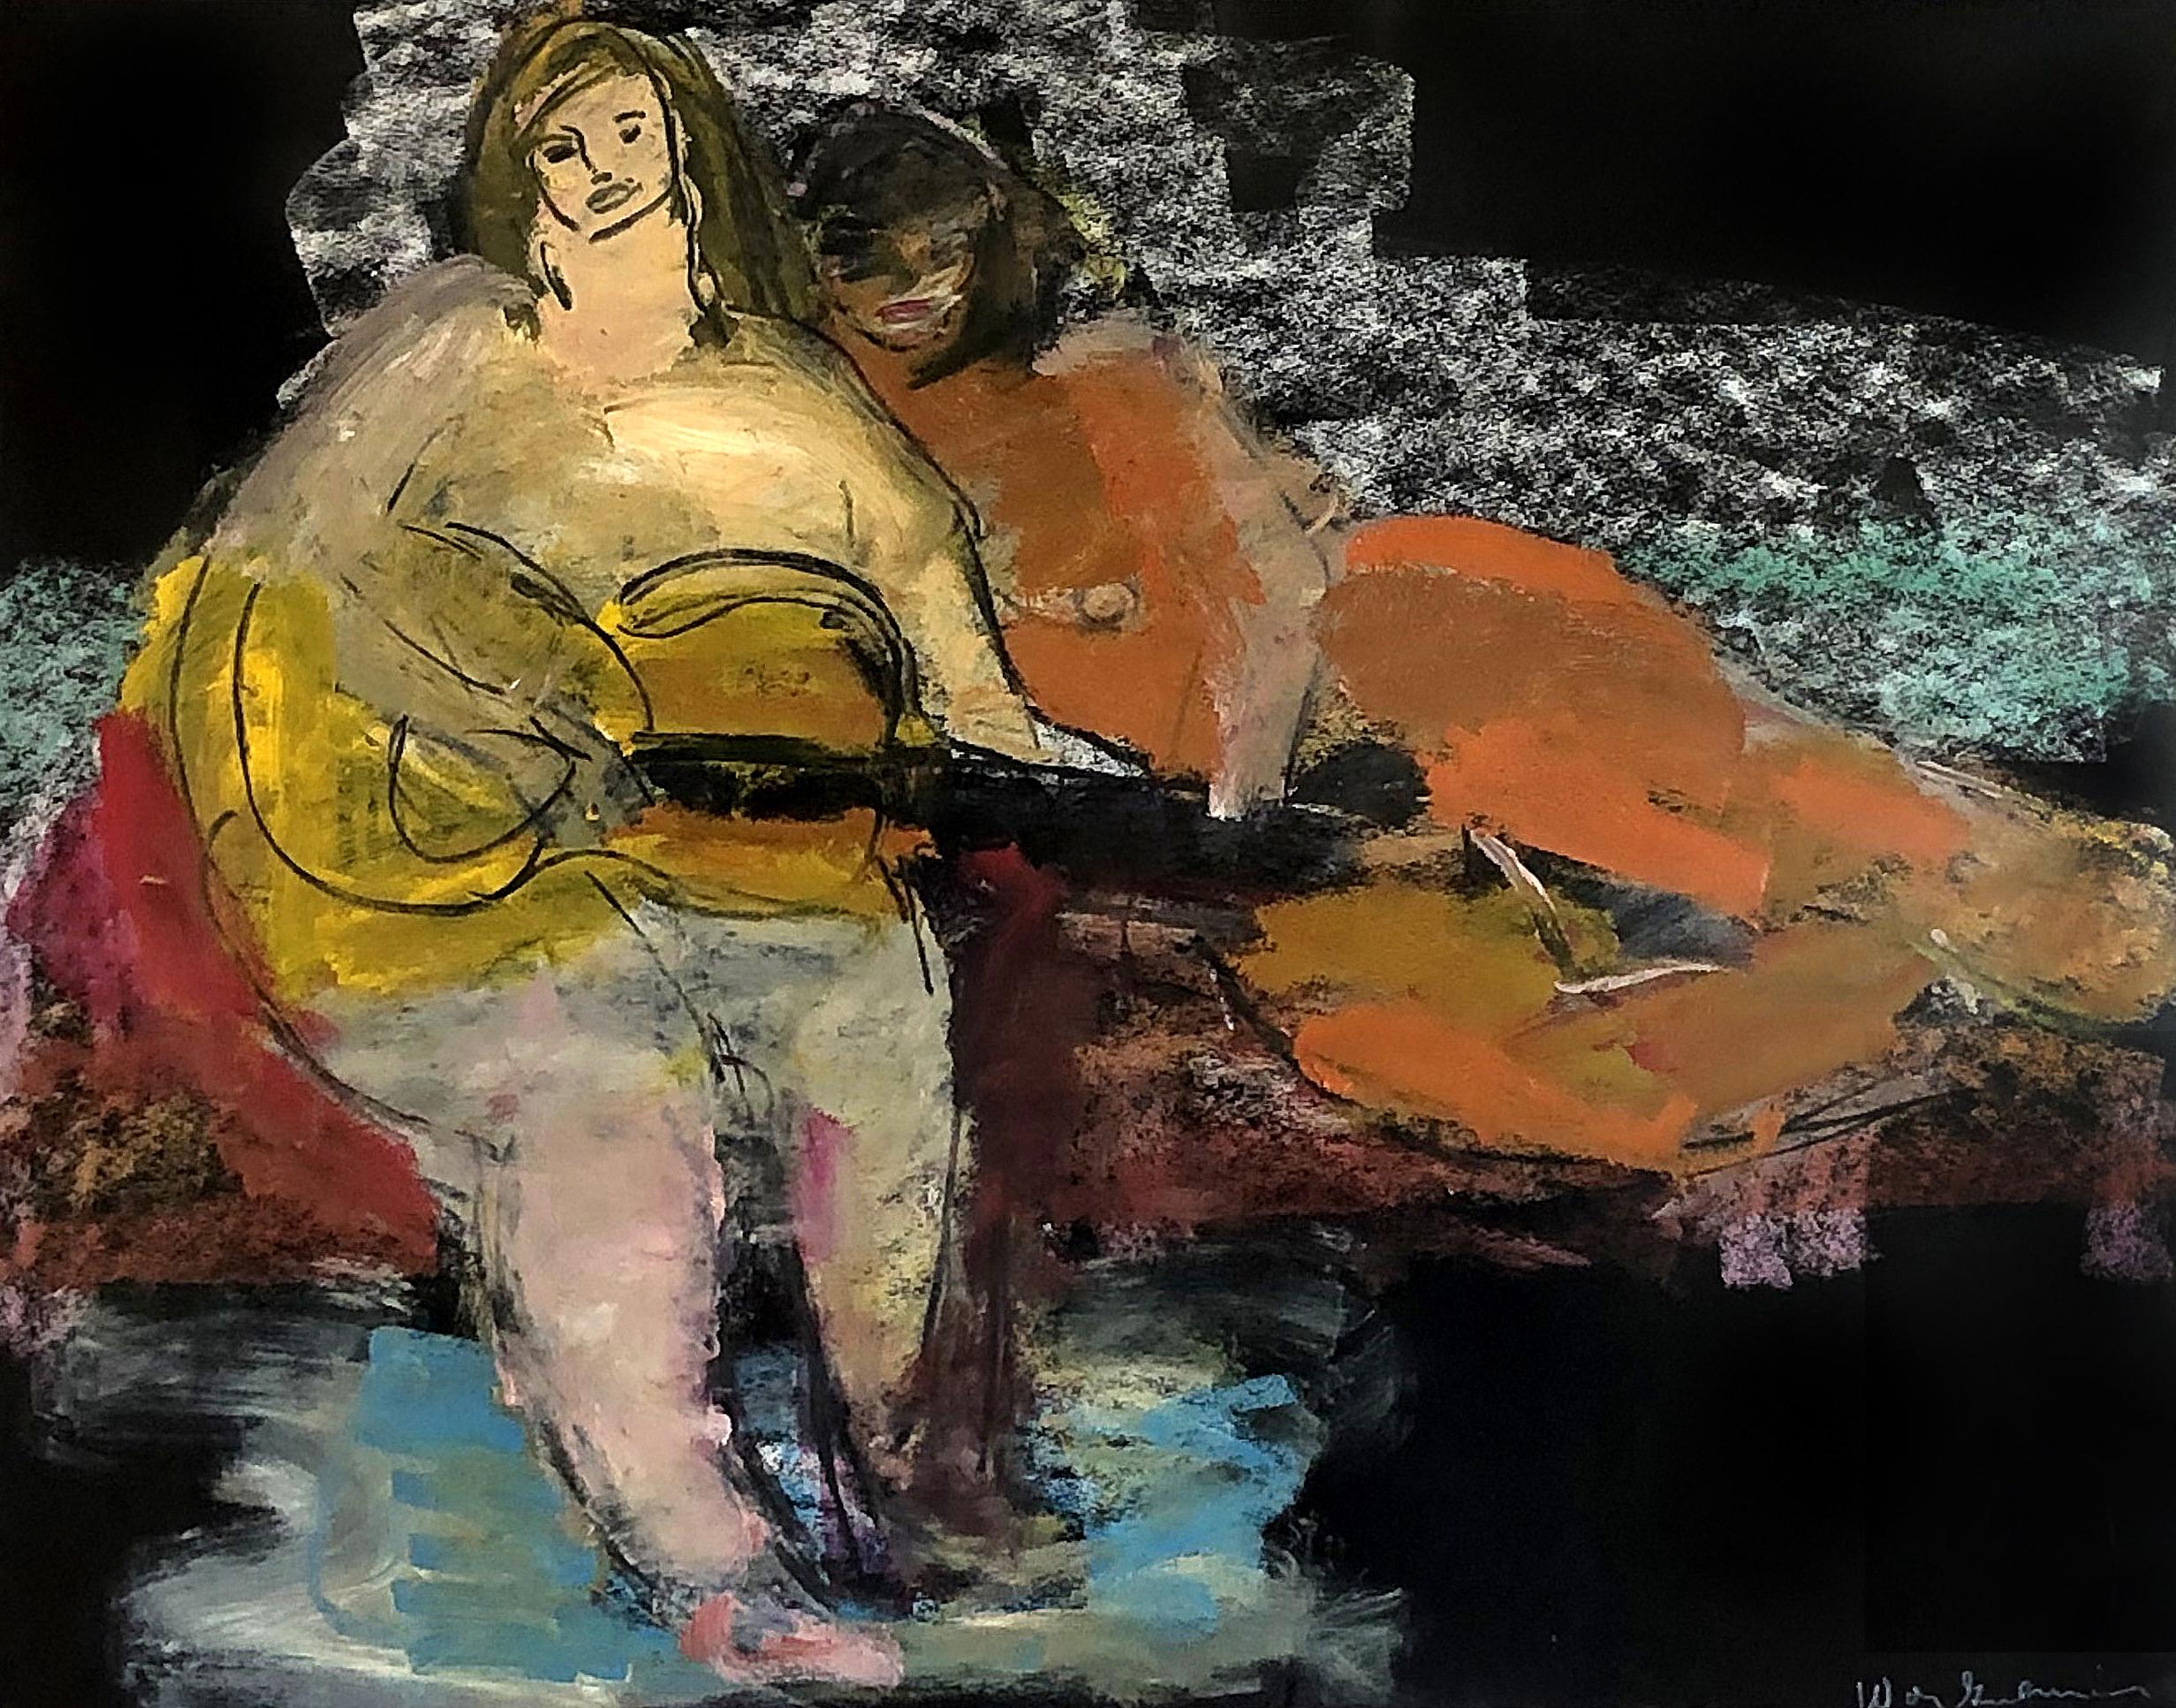 Walter Gutman midcentury abstract figurative drawing in pastel on paper

Offered for sale is a Mid-Century Modern figurative abstract pastel drawing by Walter Gutman, (American 1903-1986). The colorful drawing in pastels on paper depicts two women